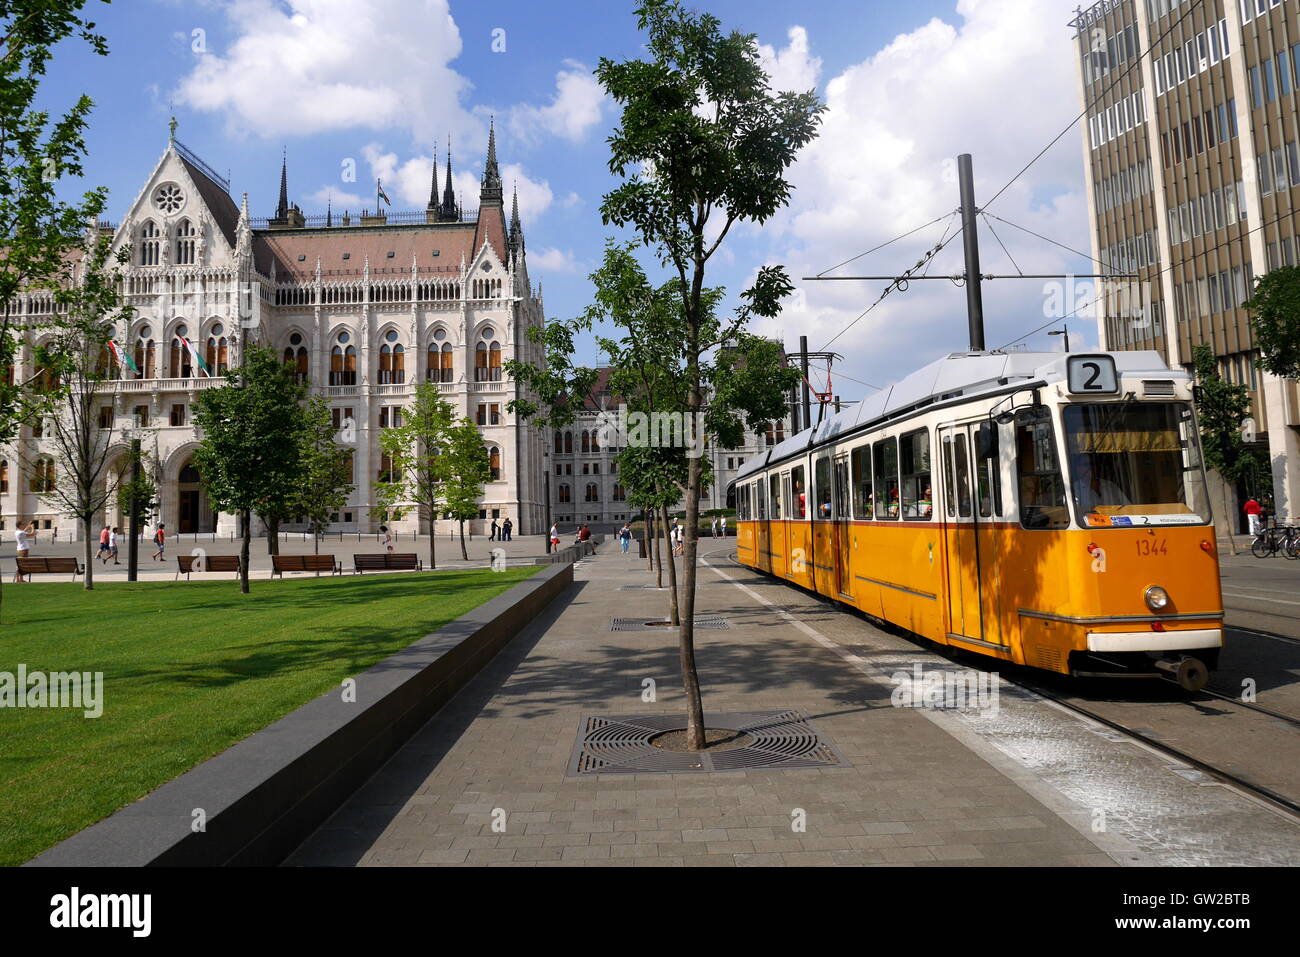 A tram trundles past the Parliament building, designed by Imre Steindl in 1885, Budapest, Hungary Stock Photo